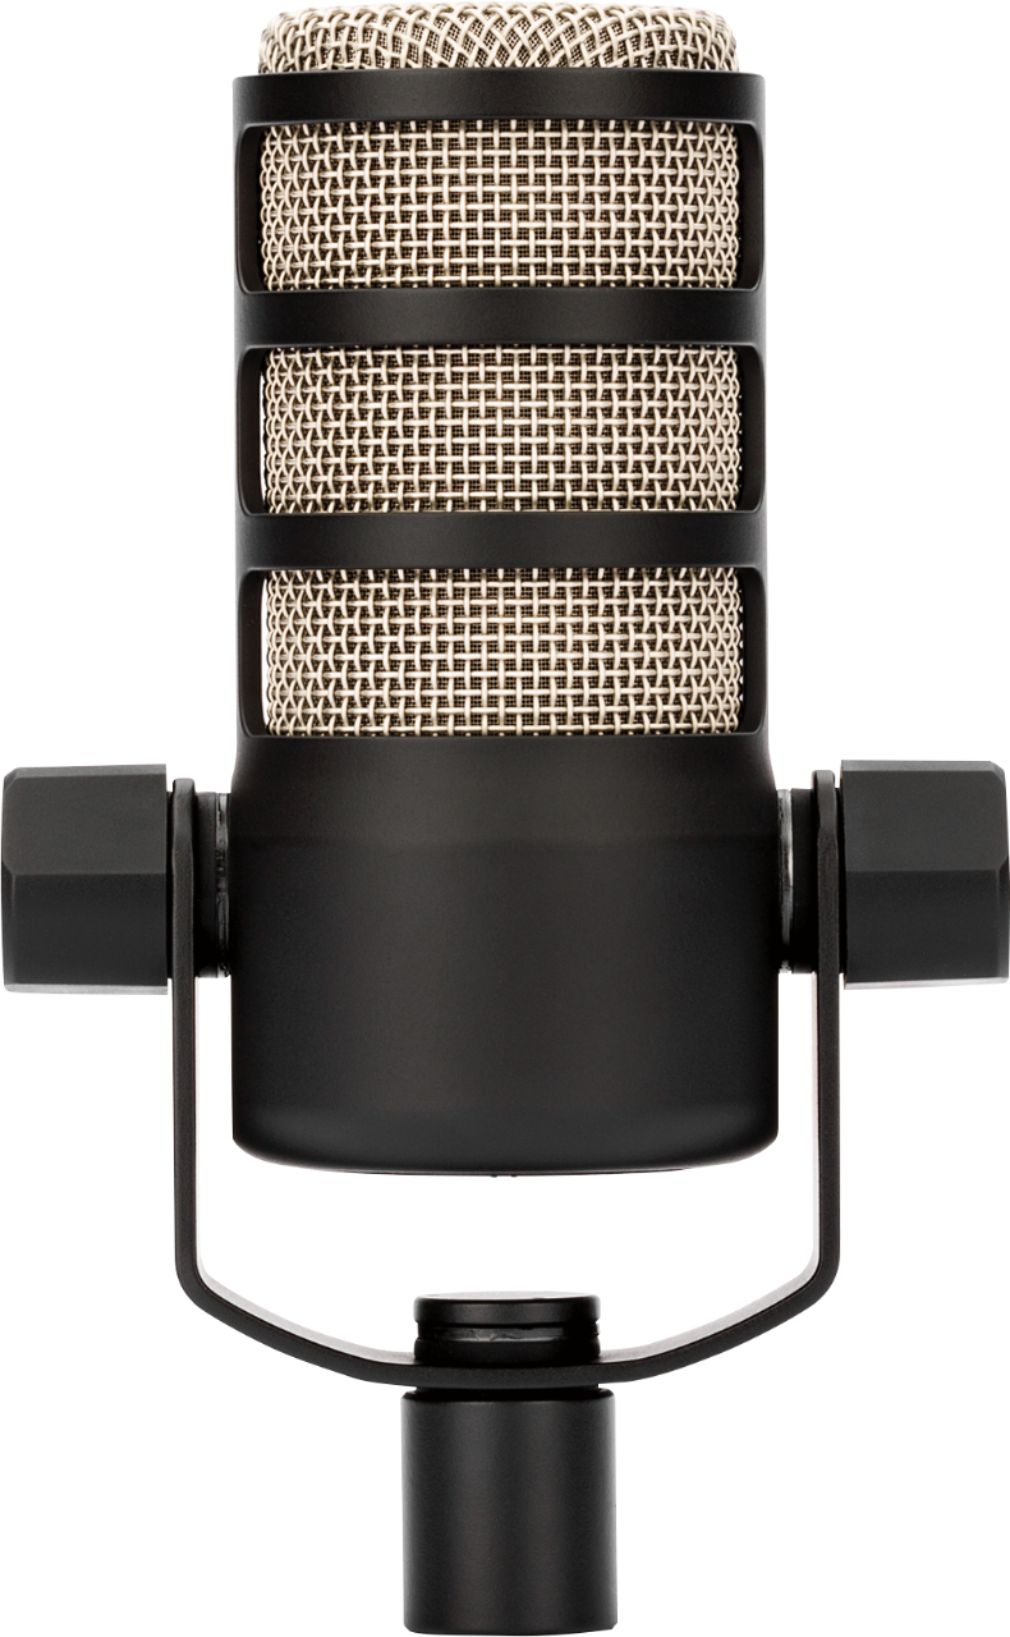 Rode Microphones PodMic Podcasting XLR Dynamic Microphone - Black